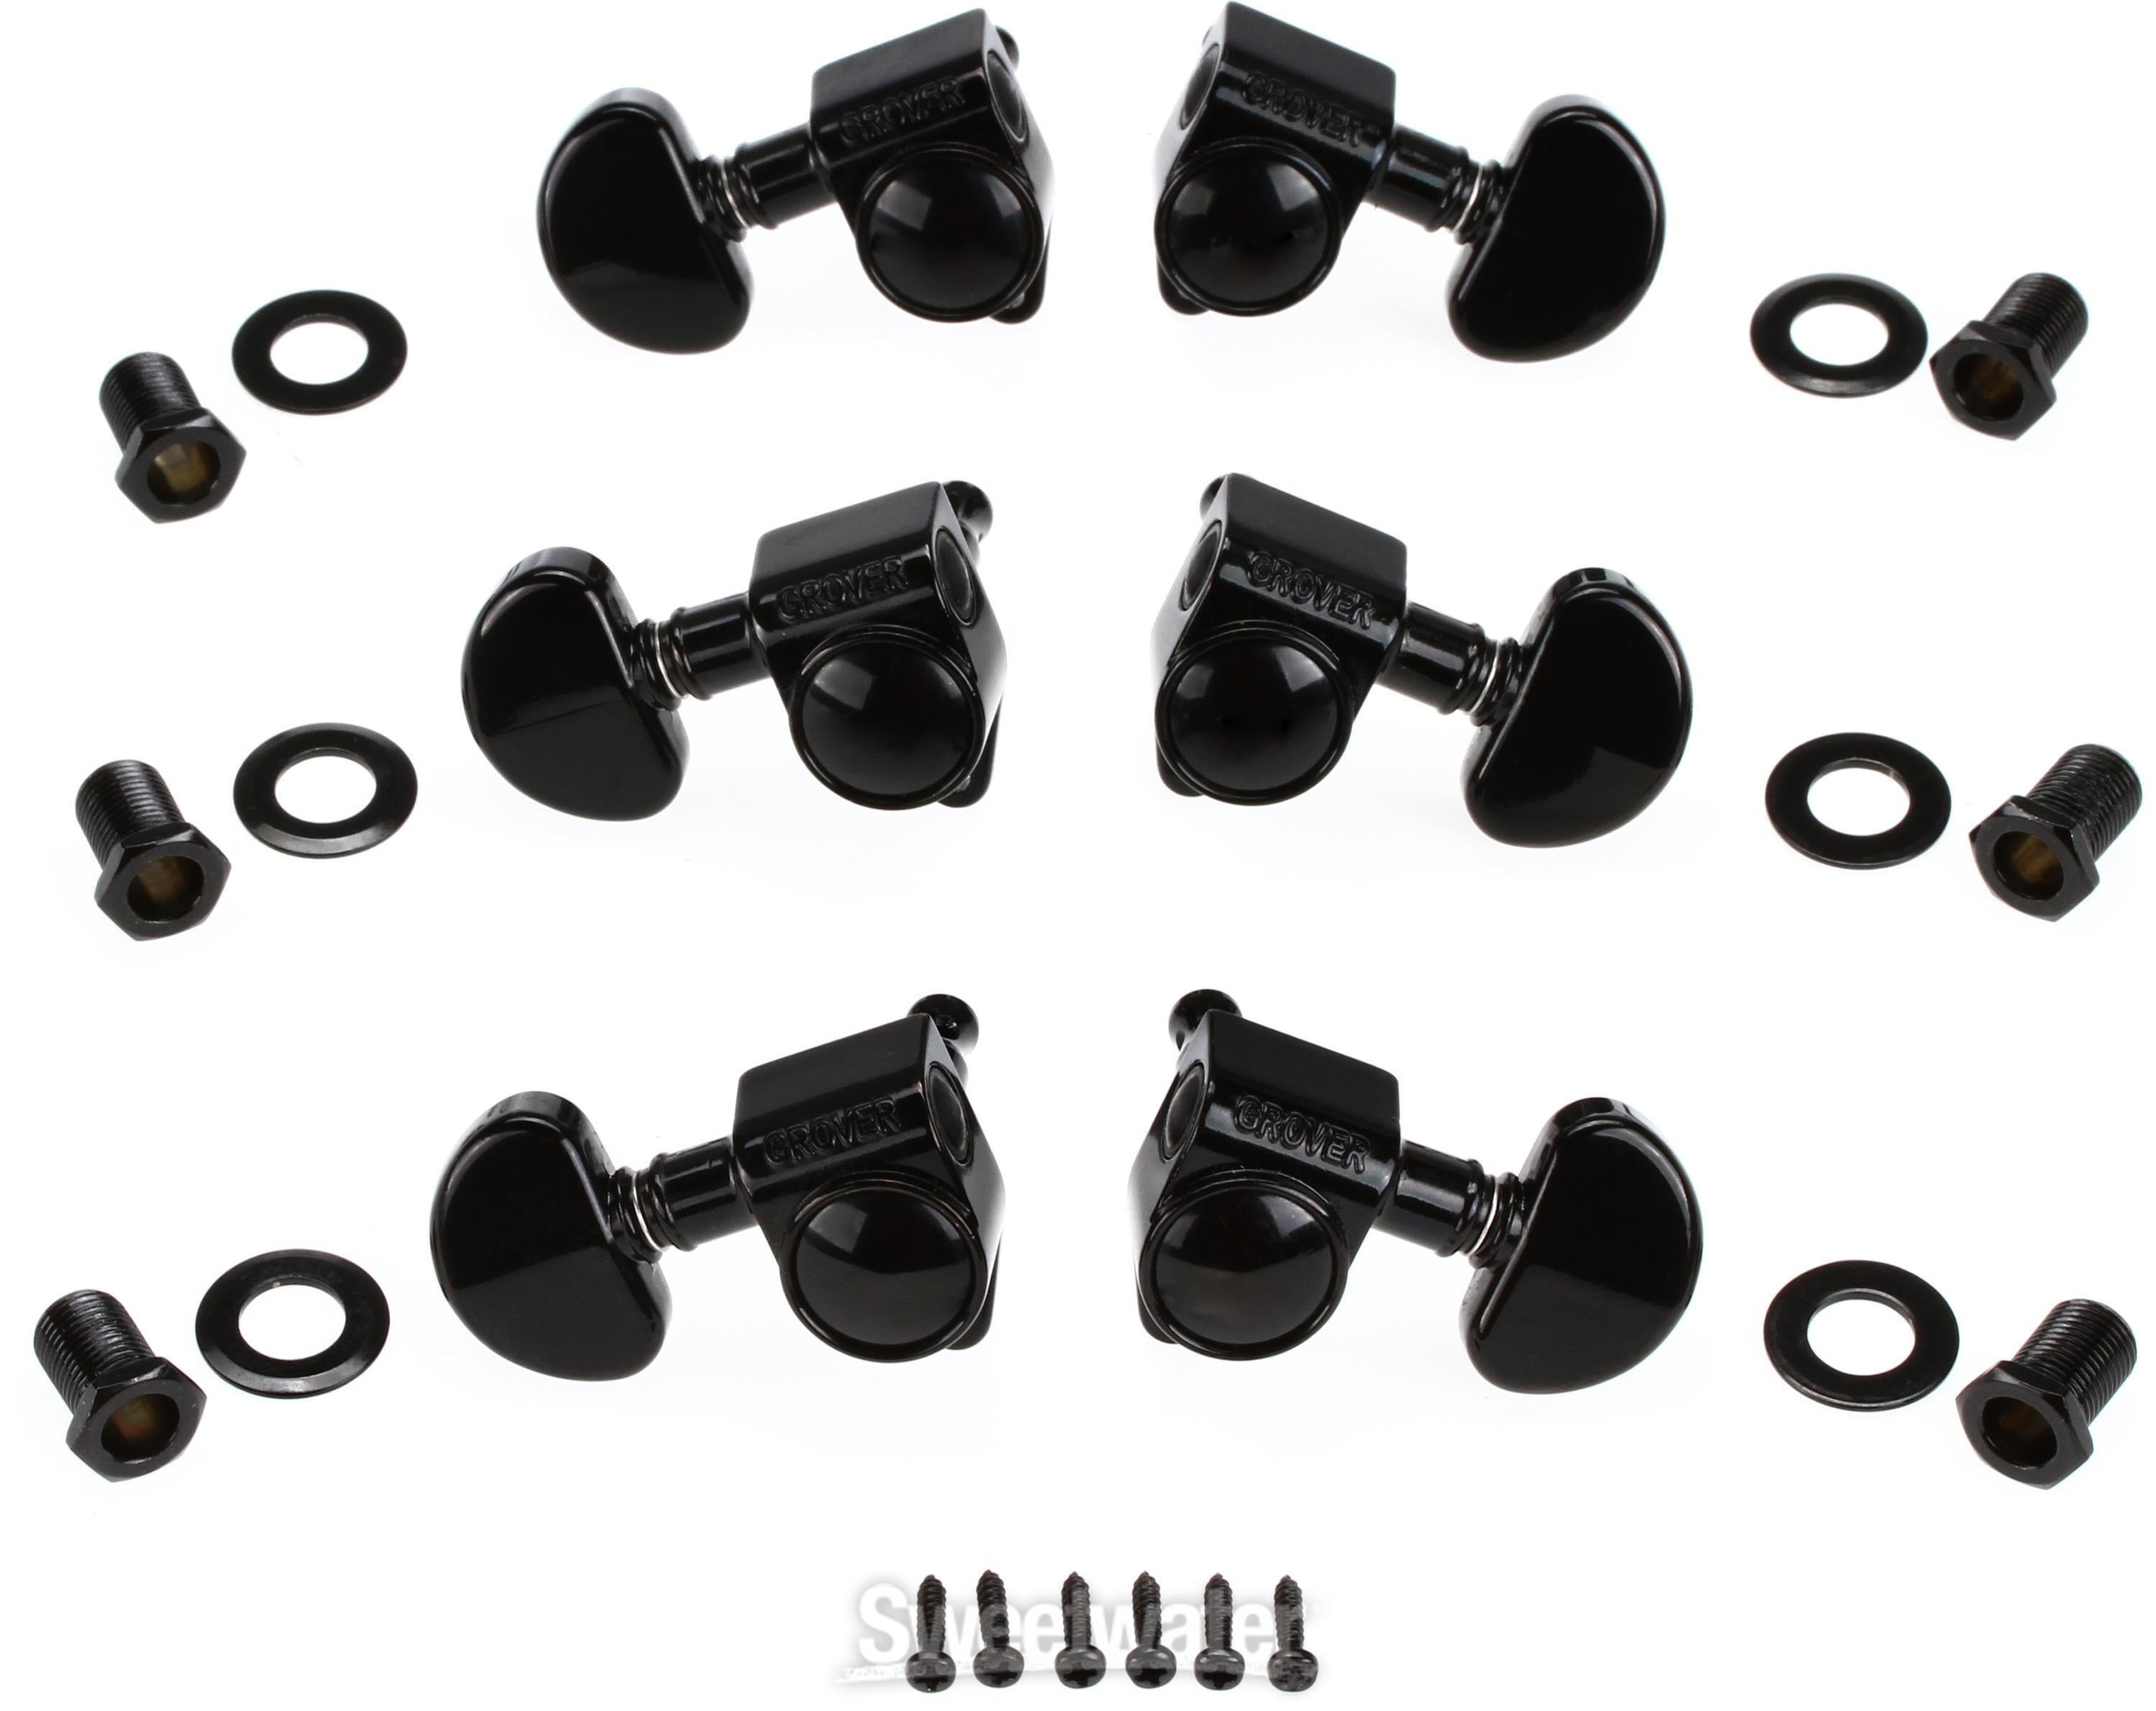 Gibson Accessories Grover Tuning Machine Heads - Black | Sweetwater